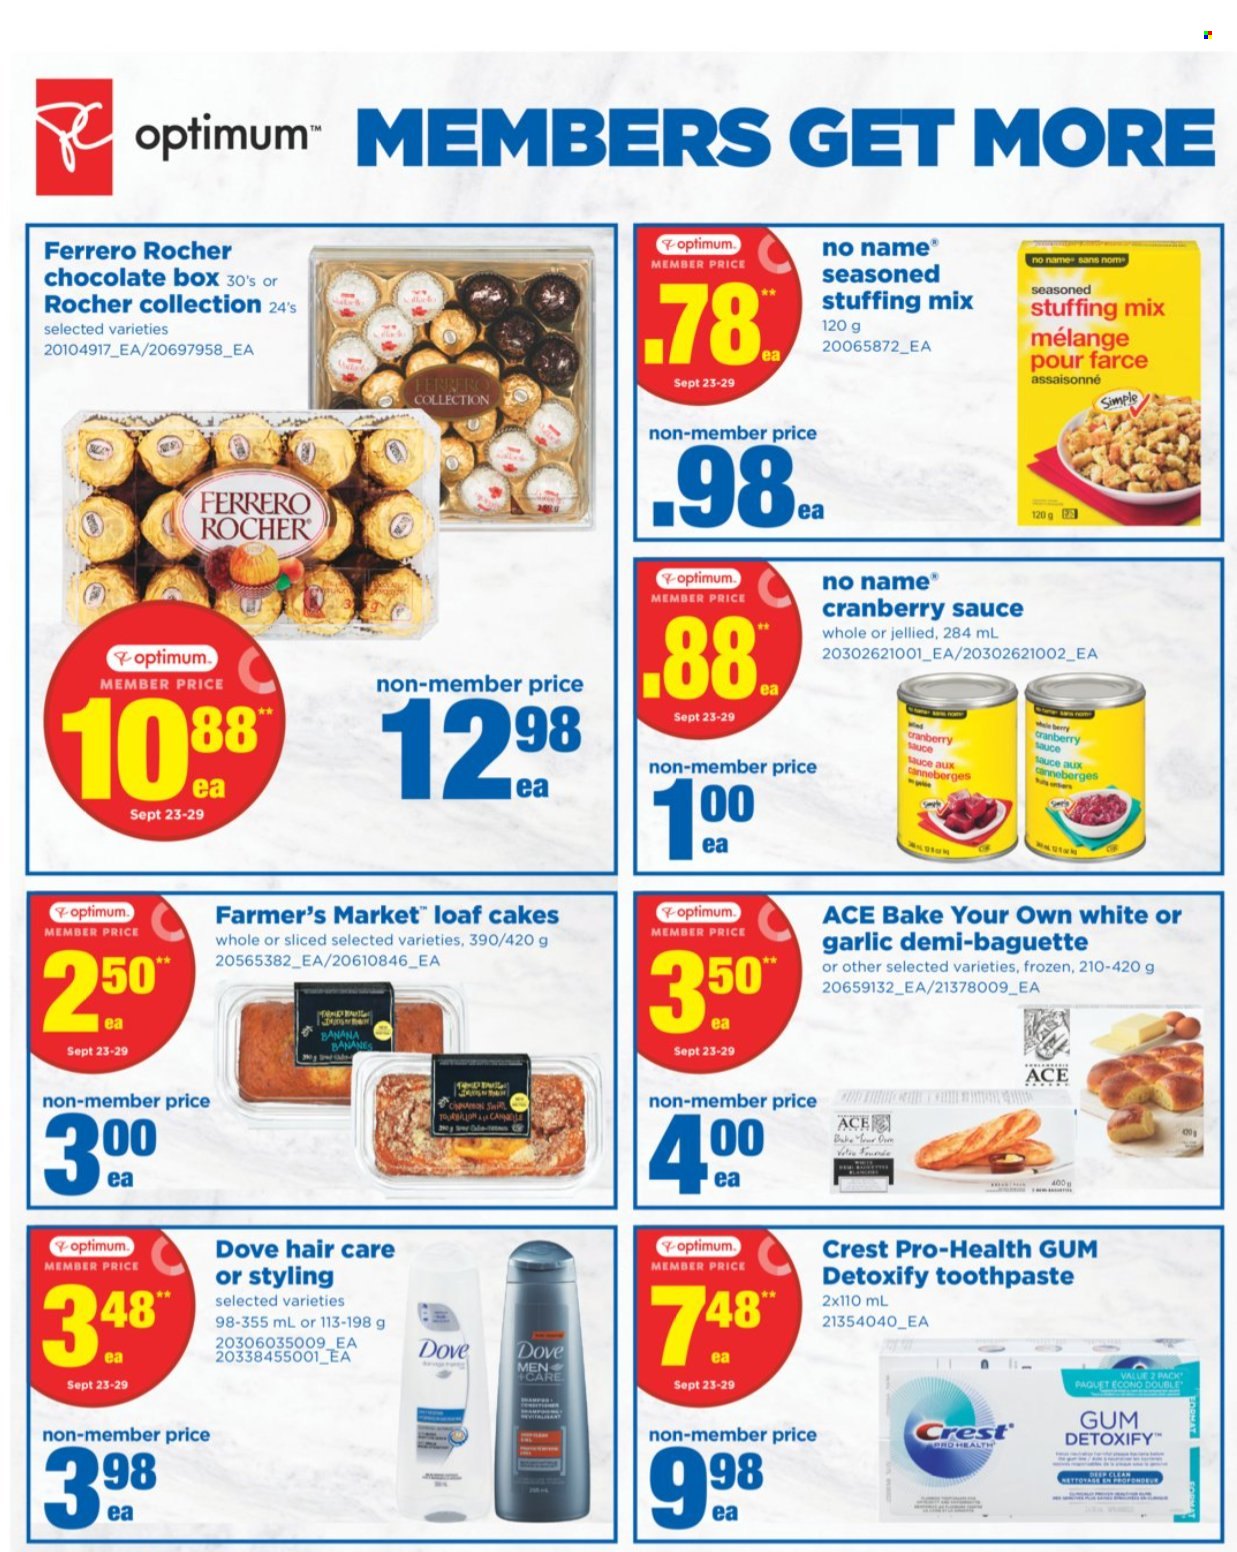 thumbnail - Real Canadian Superstore Flyer - September 23, 2021 - September 29, 2021 - Sales products - cake, Ace, garlic, No Name, sauce, chocolate, stuffing mix, cranberry sauce, toothpaste, Crest, Optimum, baguette, Dove, Ferrero Rocher. Page 5.